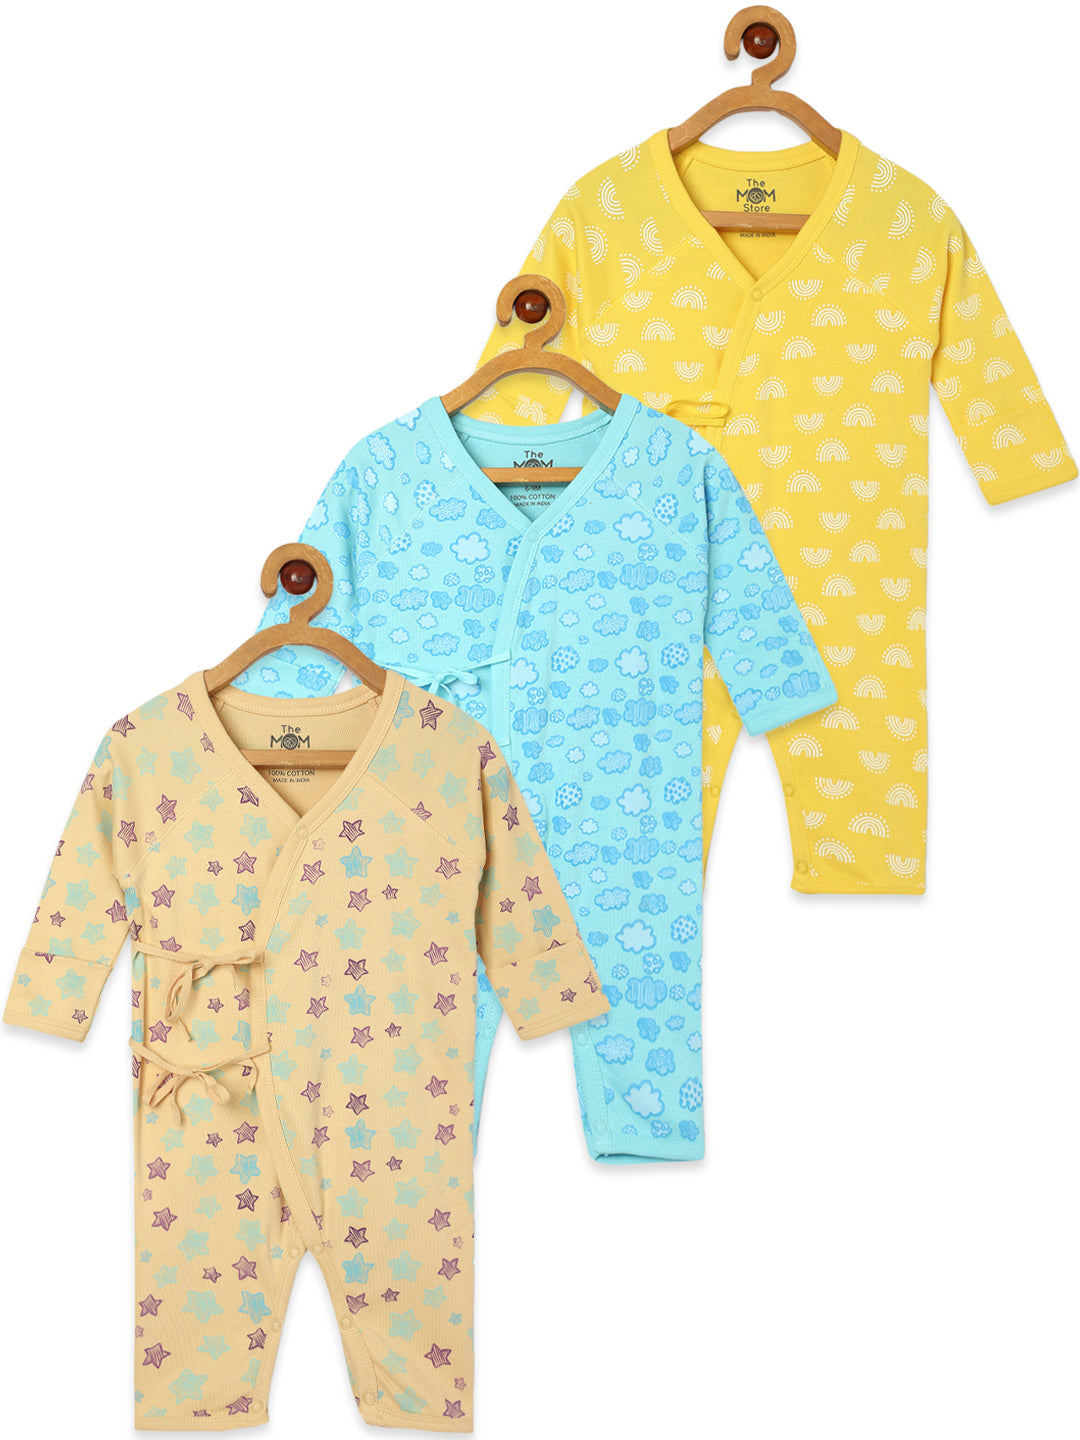 Jabla Infant Romper Combo Of 3: The Astros-Cloudy Celios-The Sun Crown